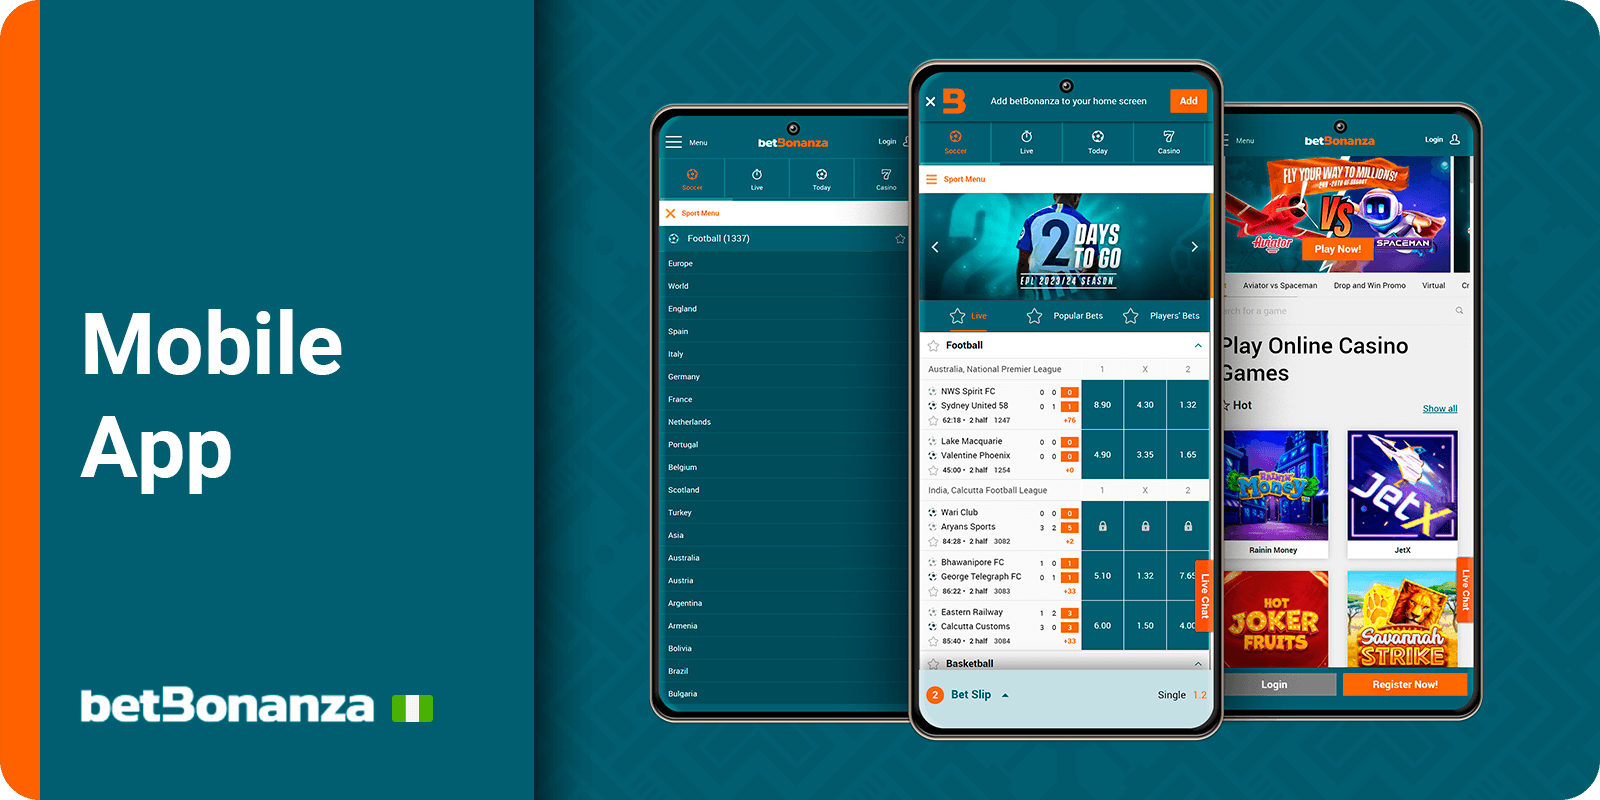 betbonanza mobile app overview